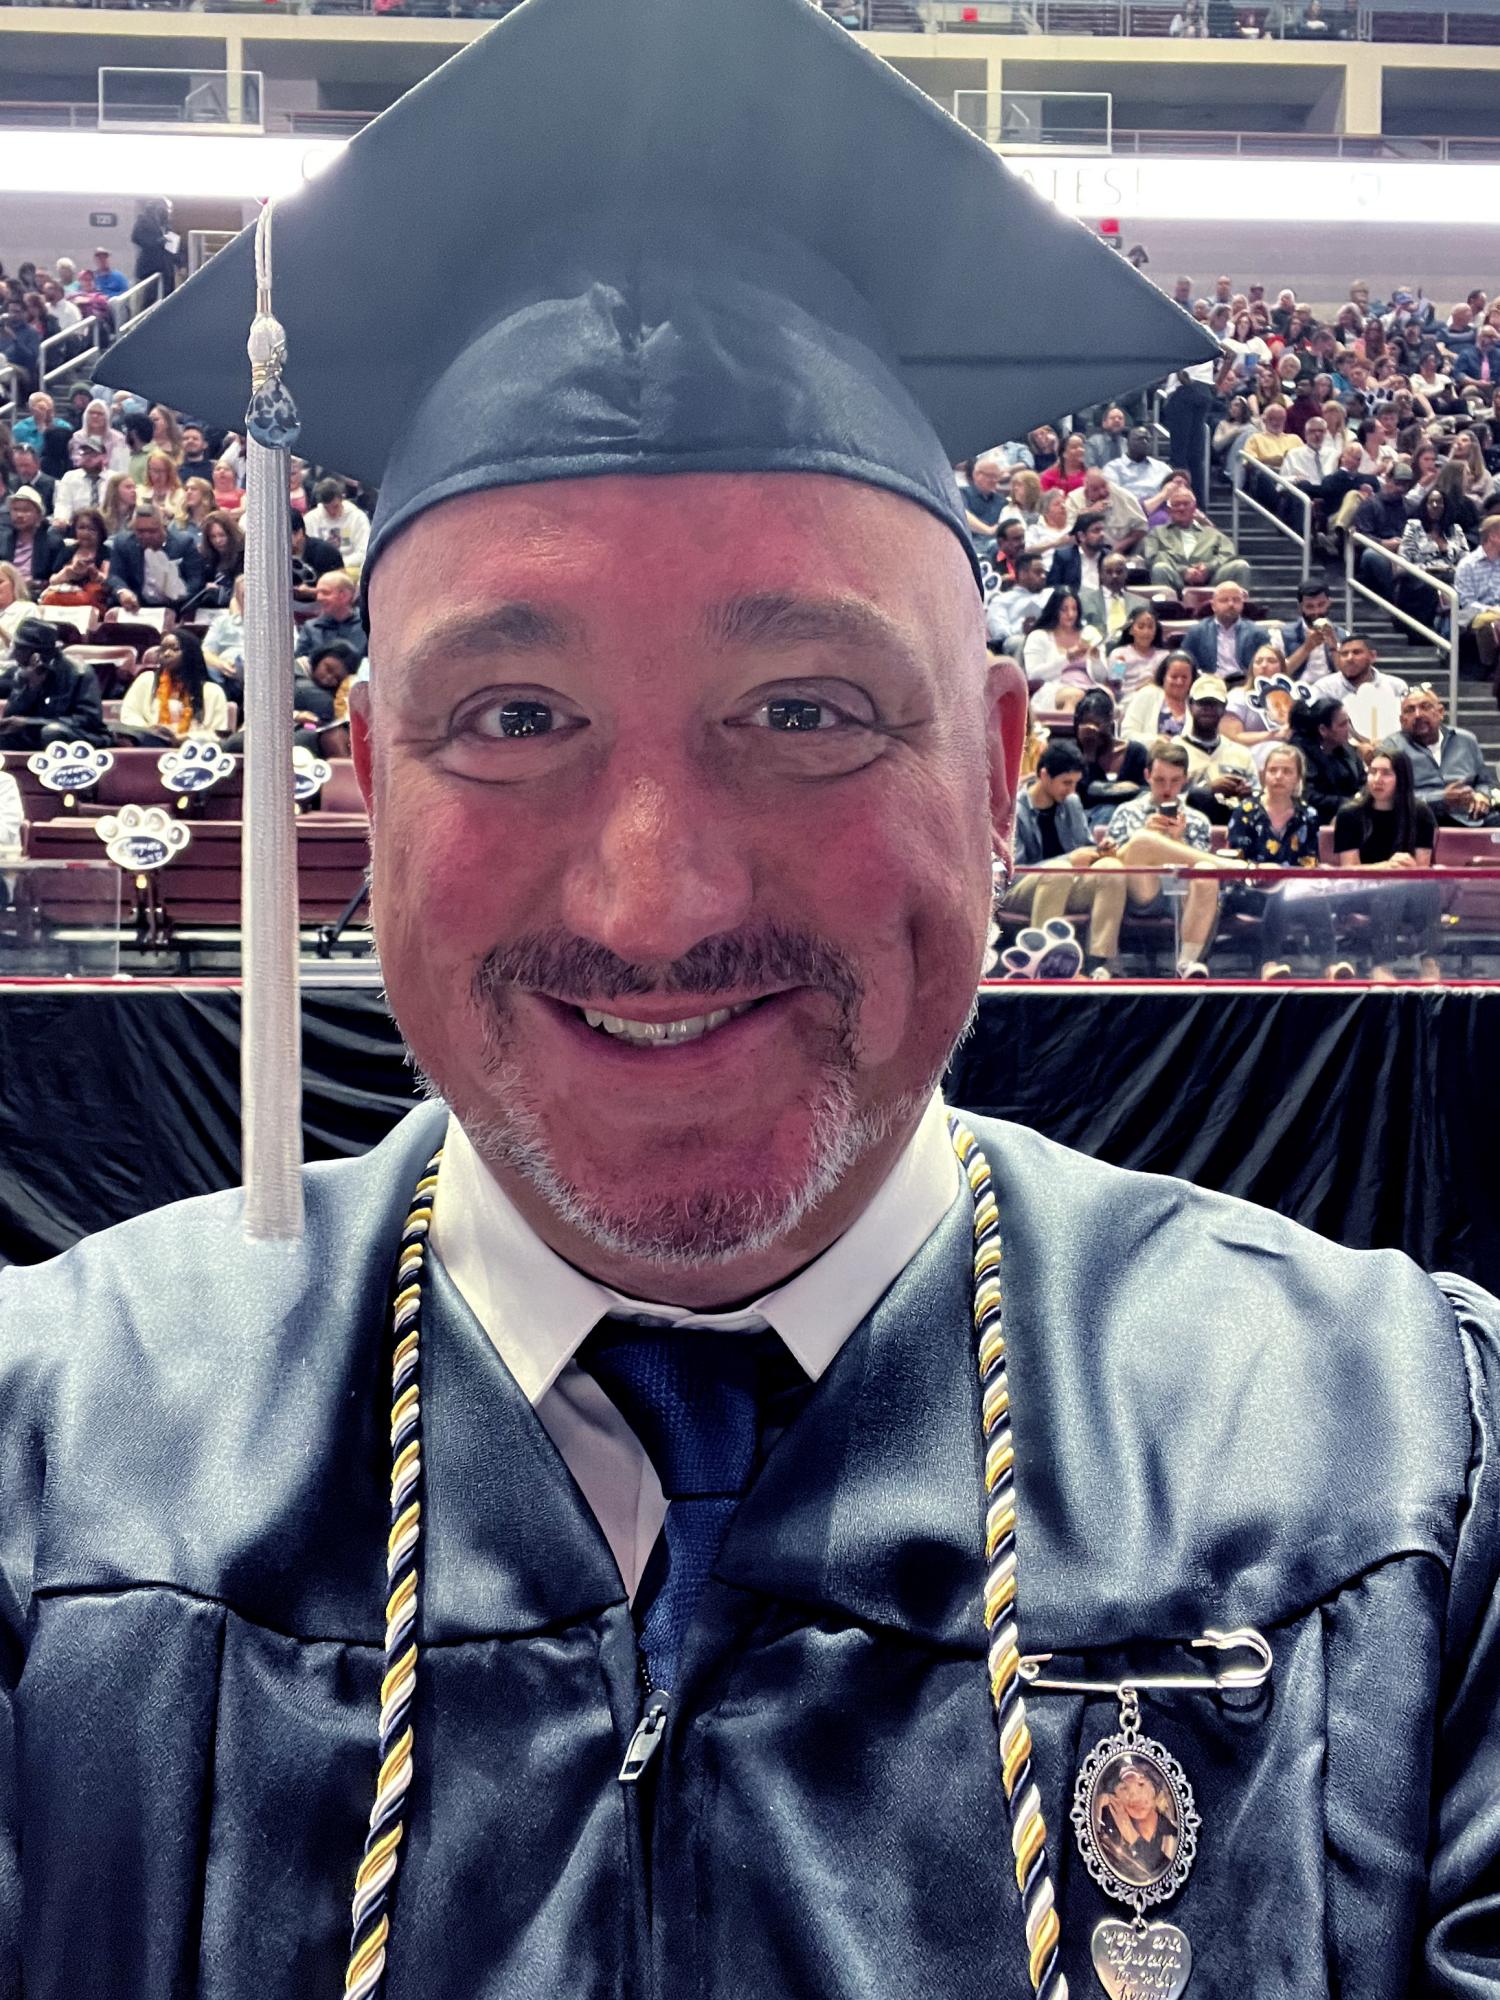 a man wearing a graduation cap and gown in front of stands in an arena